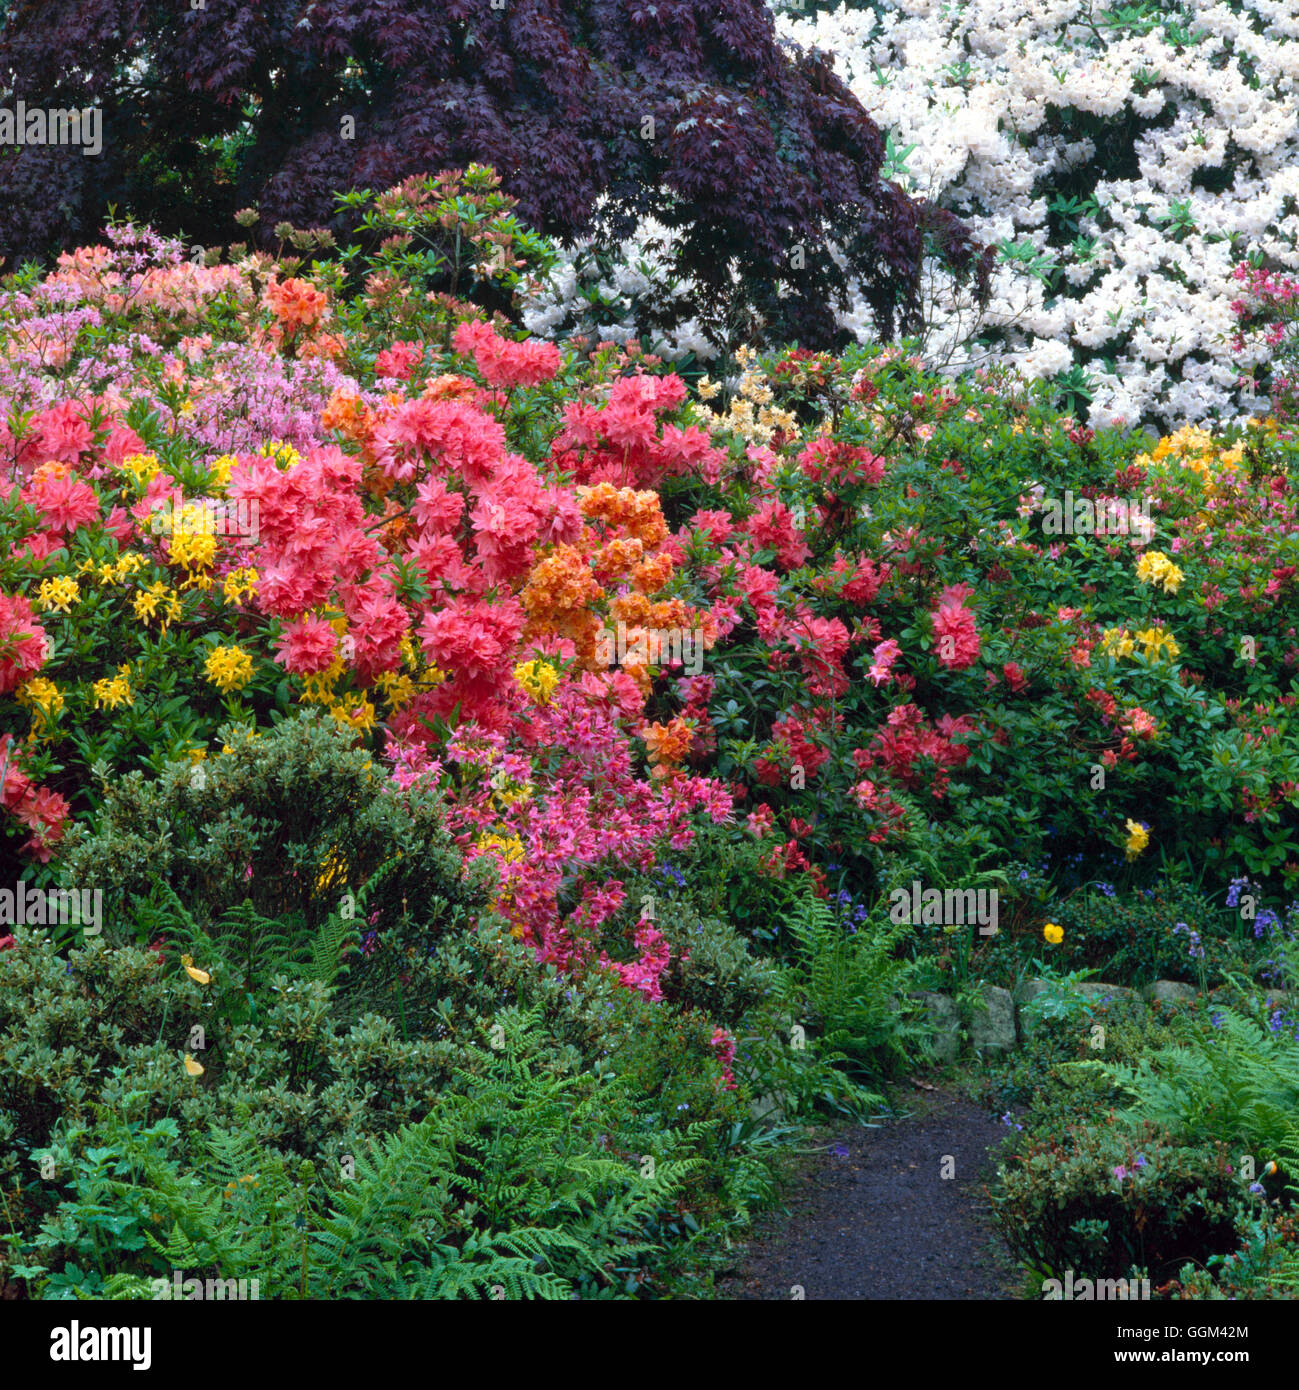 Rhododendron and Azalea Garden - underplanted with Ferns   RAH019908 Stock Photo